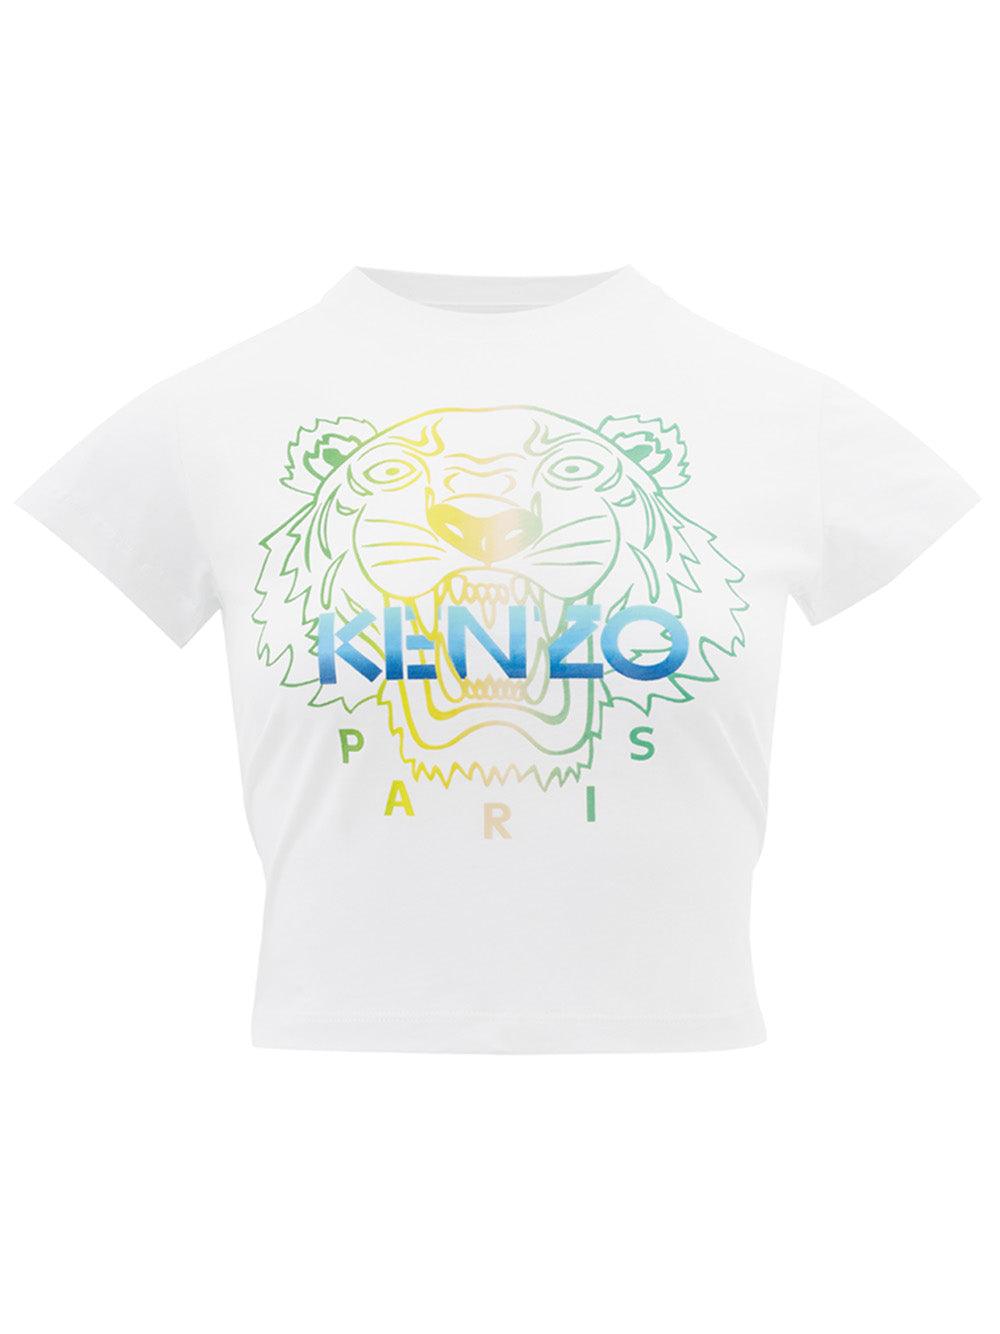 Kenzo White Cropped T-Shirt with Front Print - Ellie Belle